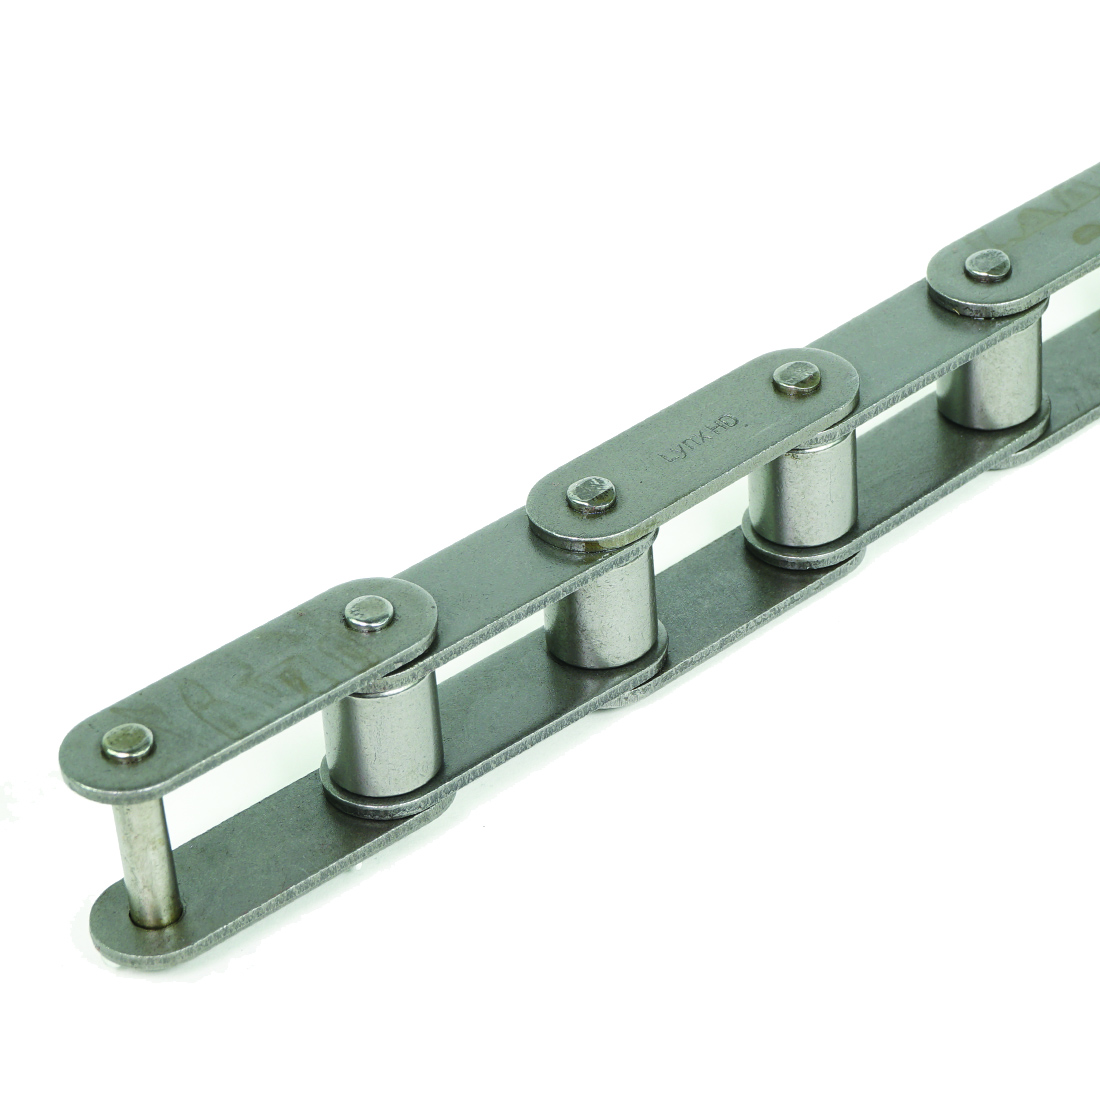  - Agricultural Roller Chain